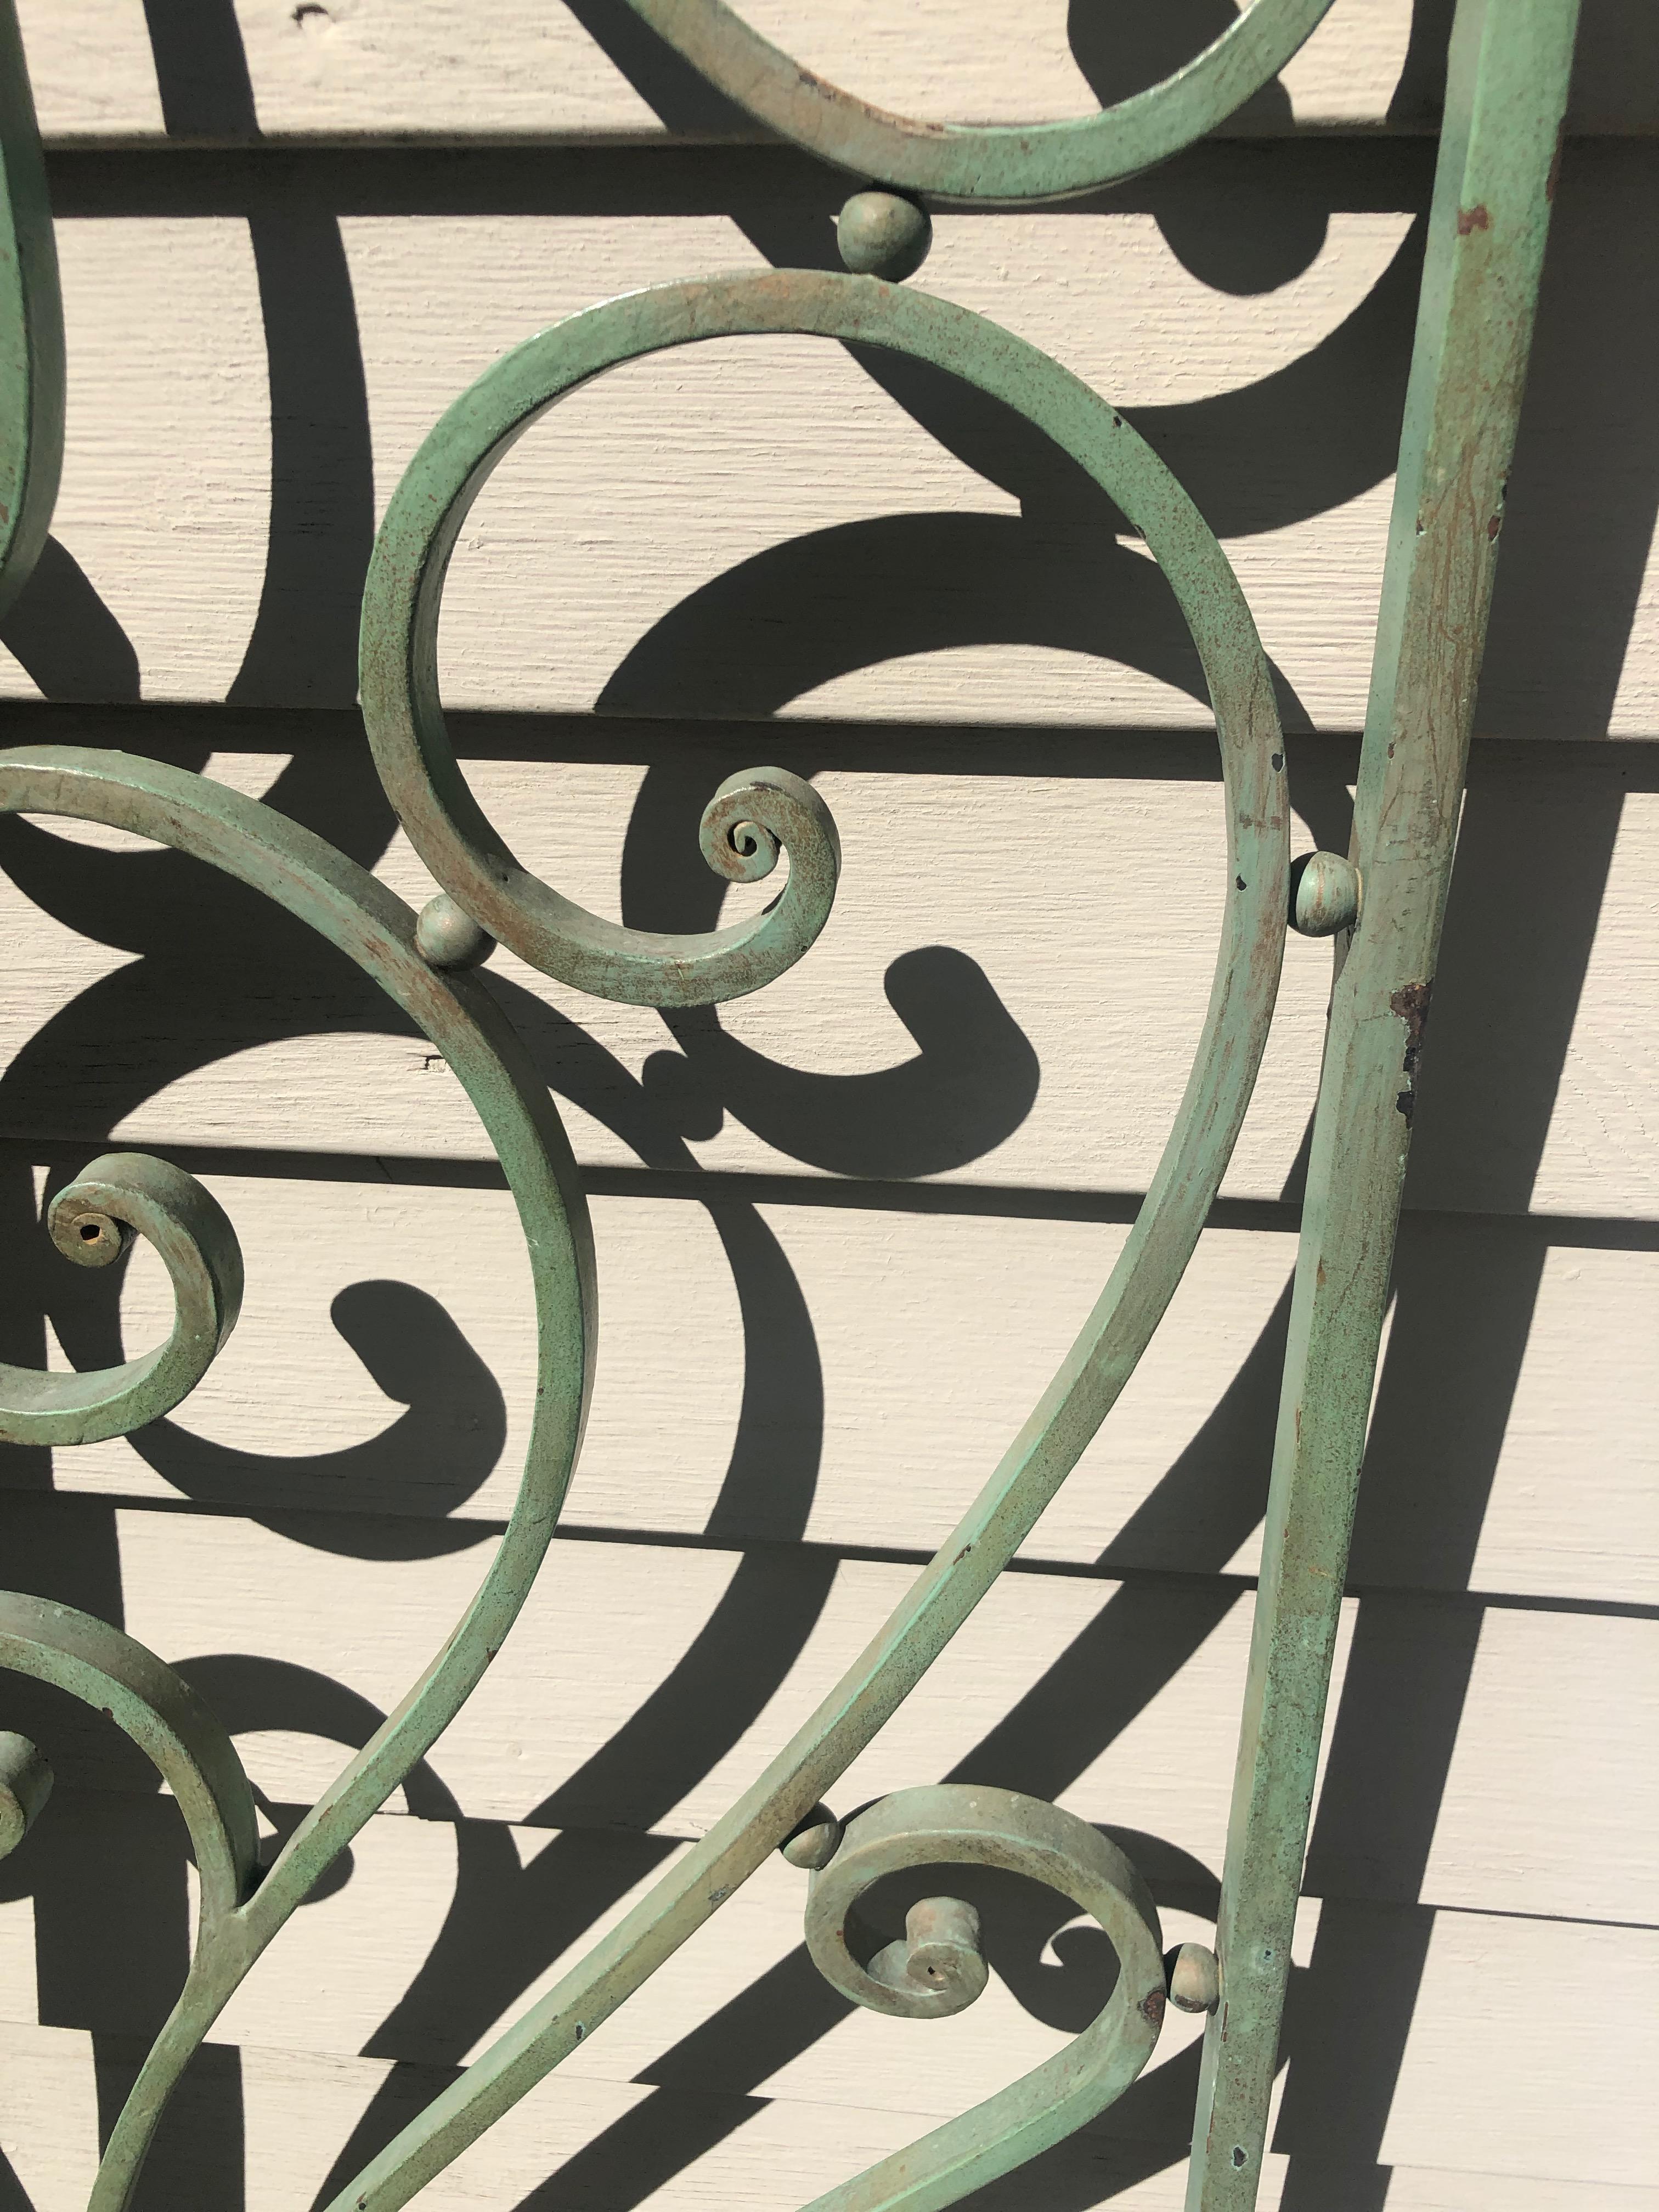 Pair of French Wrought Iron Beaux Arts-Style Gates with Mounting Hardware #1 5